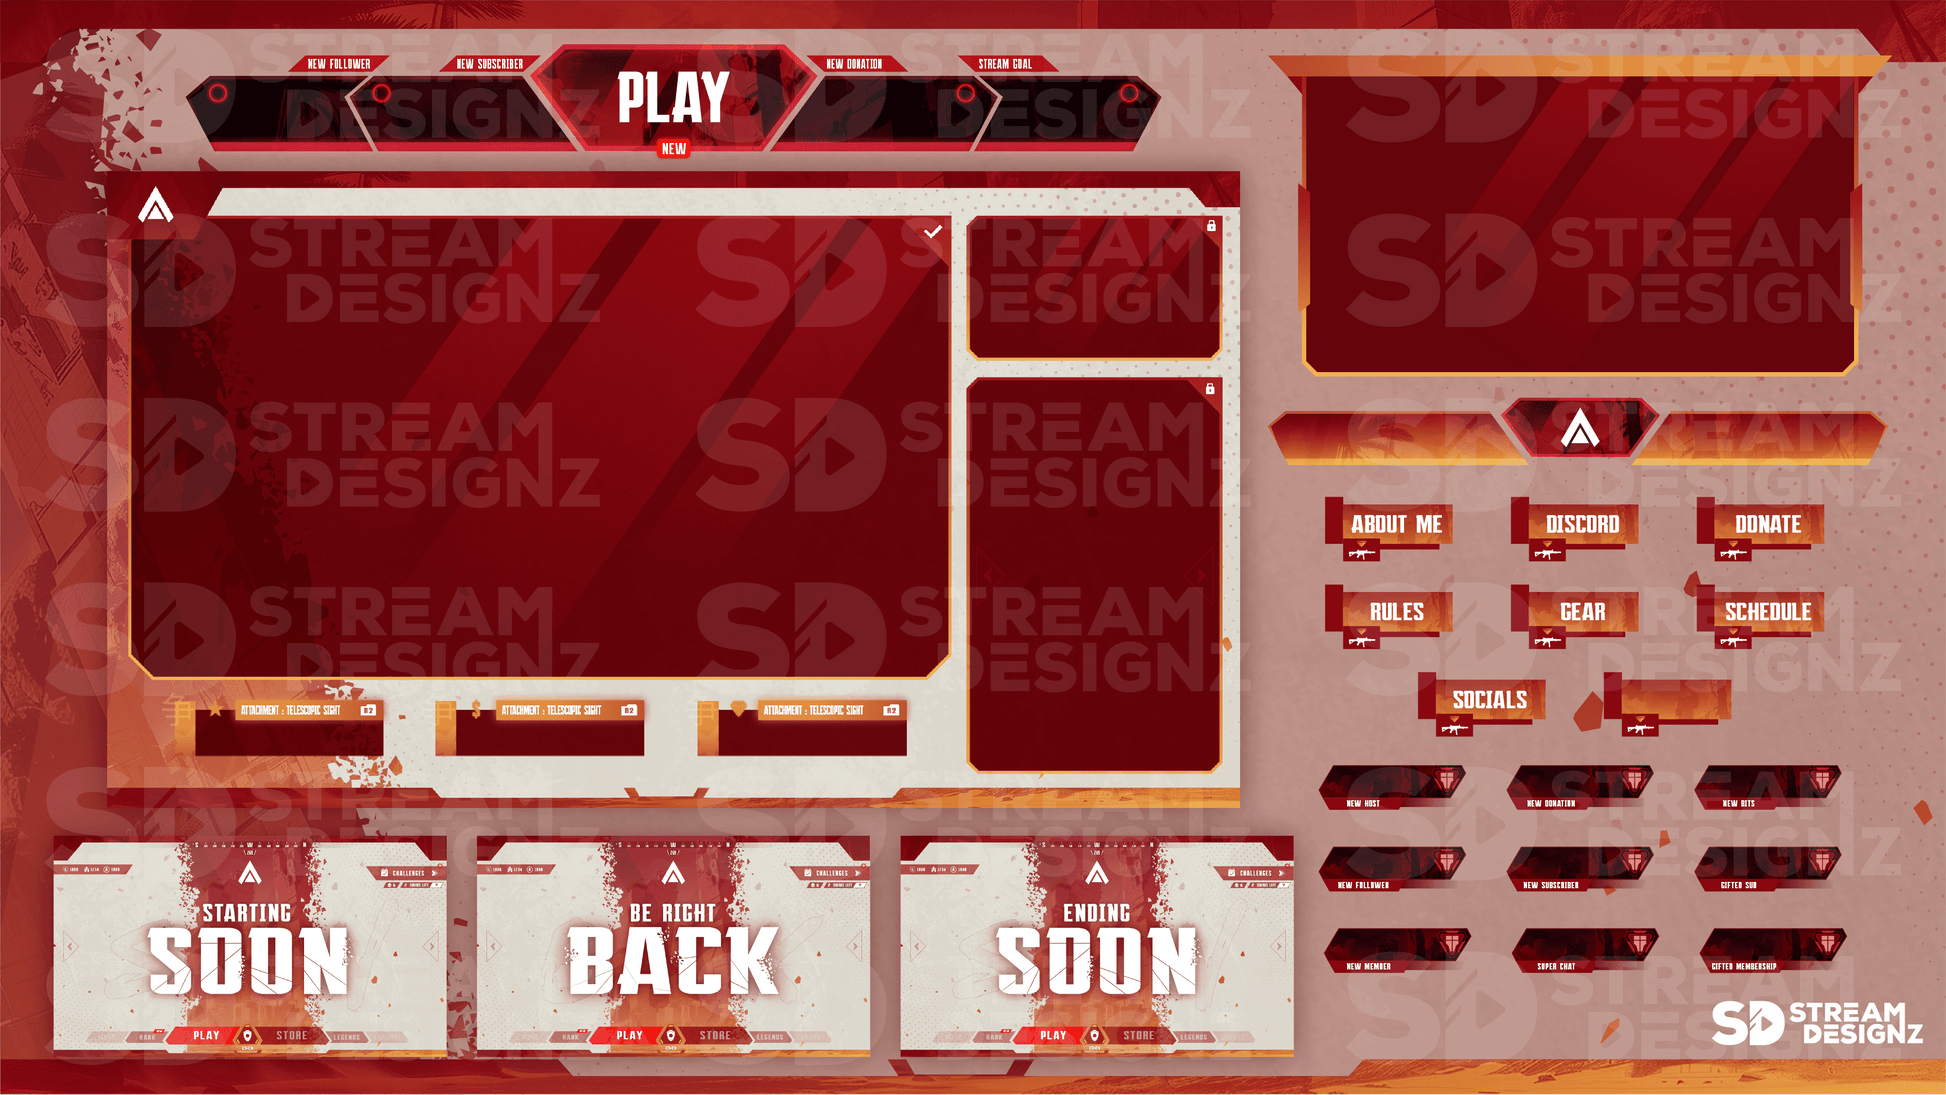 static stream overlay package feature image legends stream designz